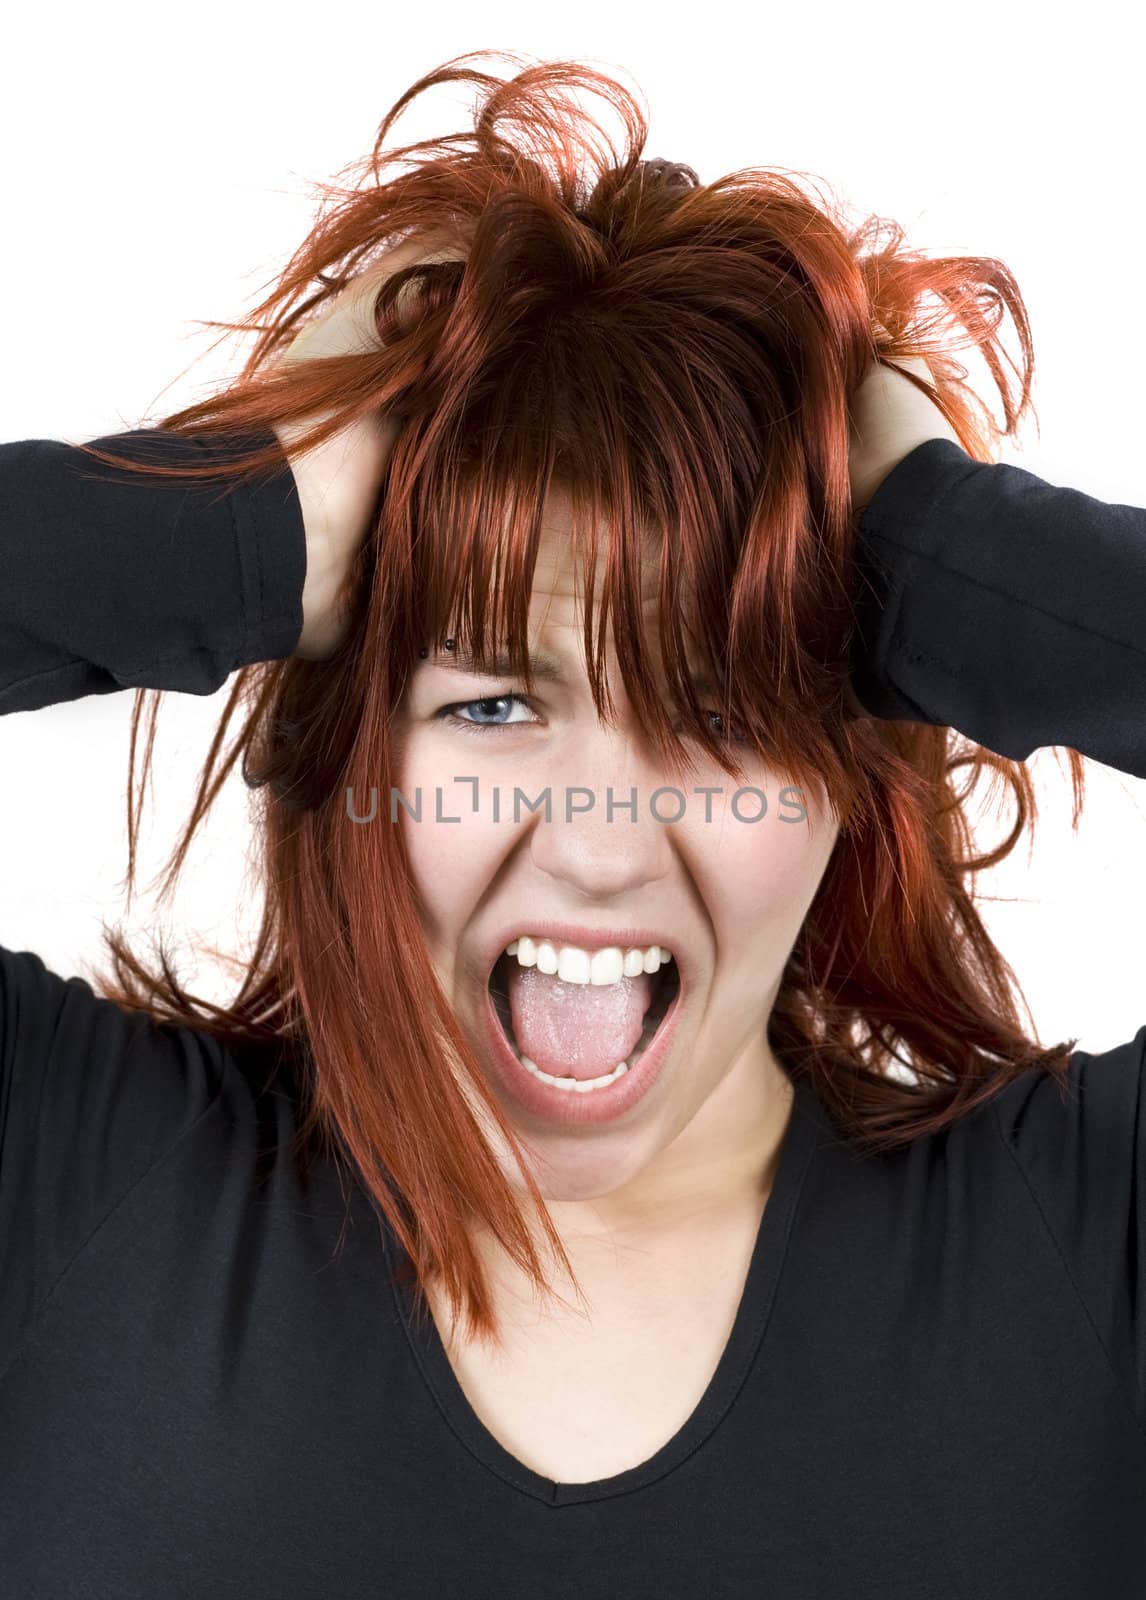 Frustrated modern business female shouting out her annoyance.

Studio shot.